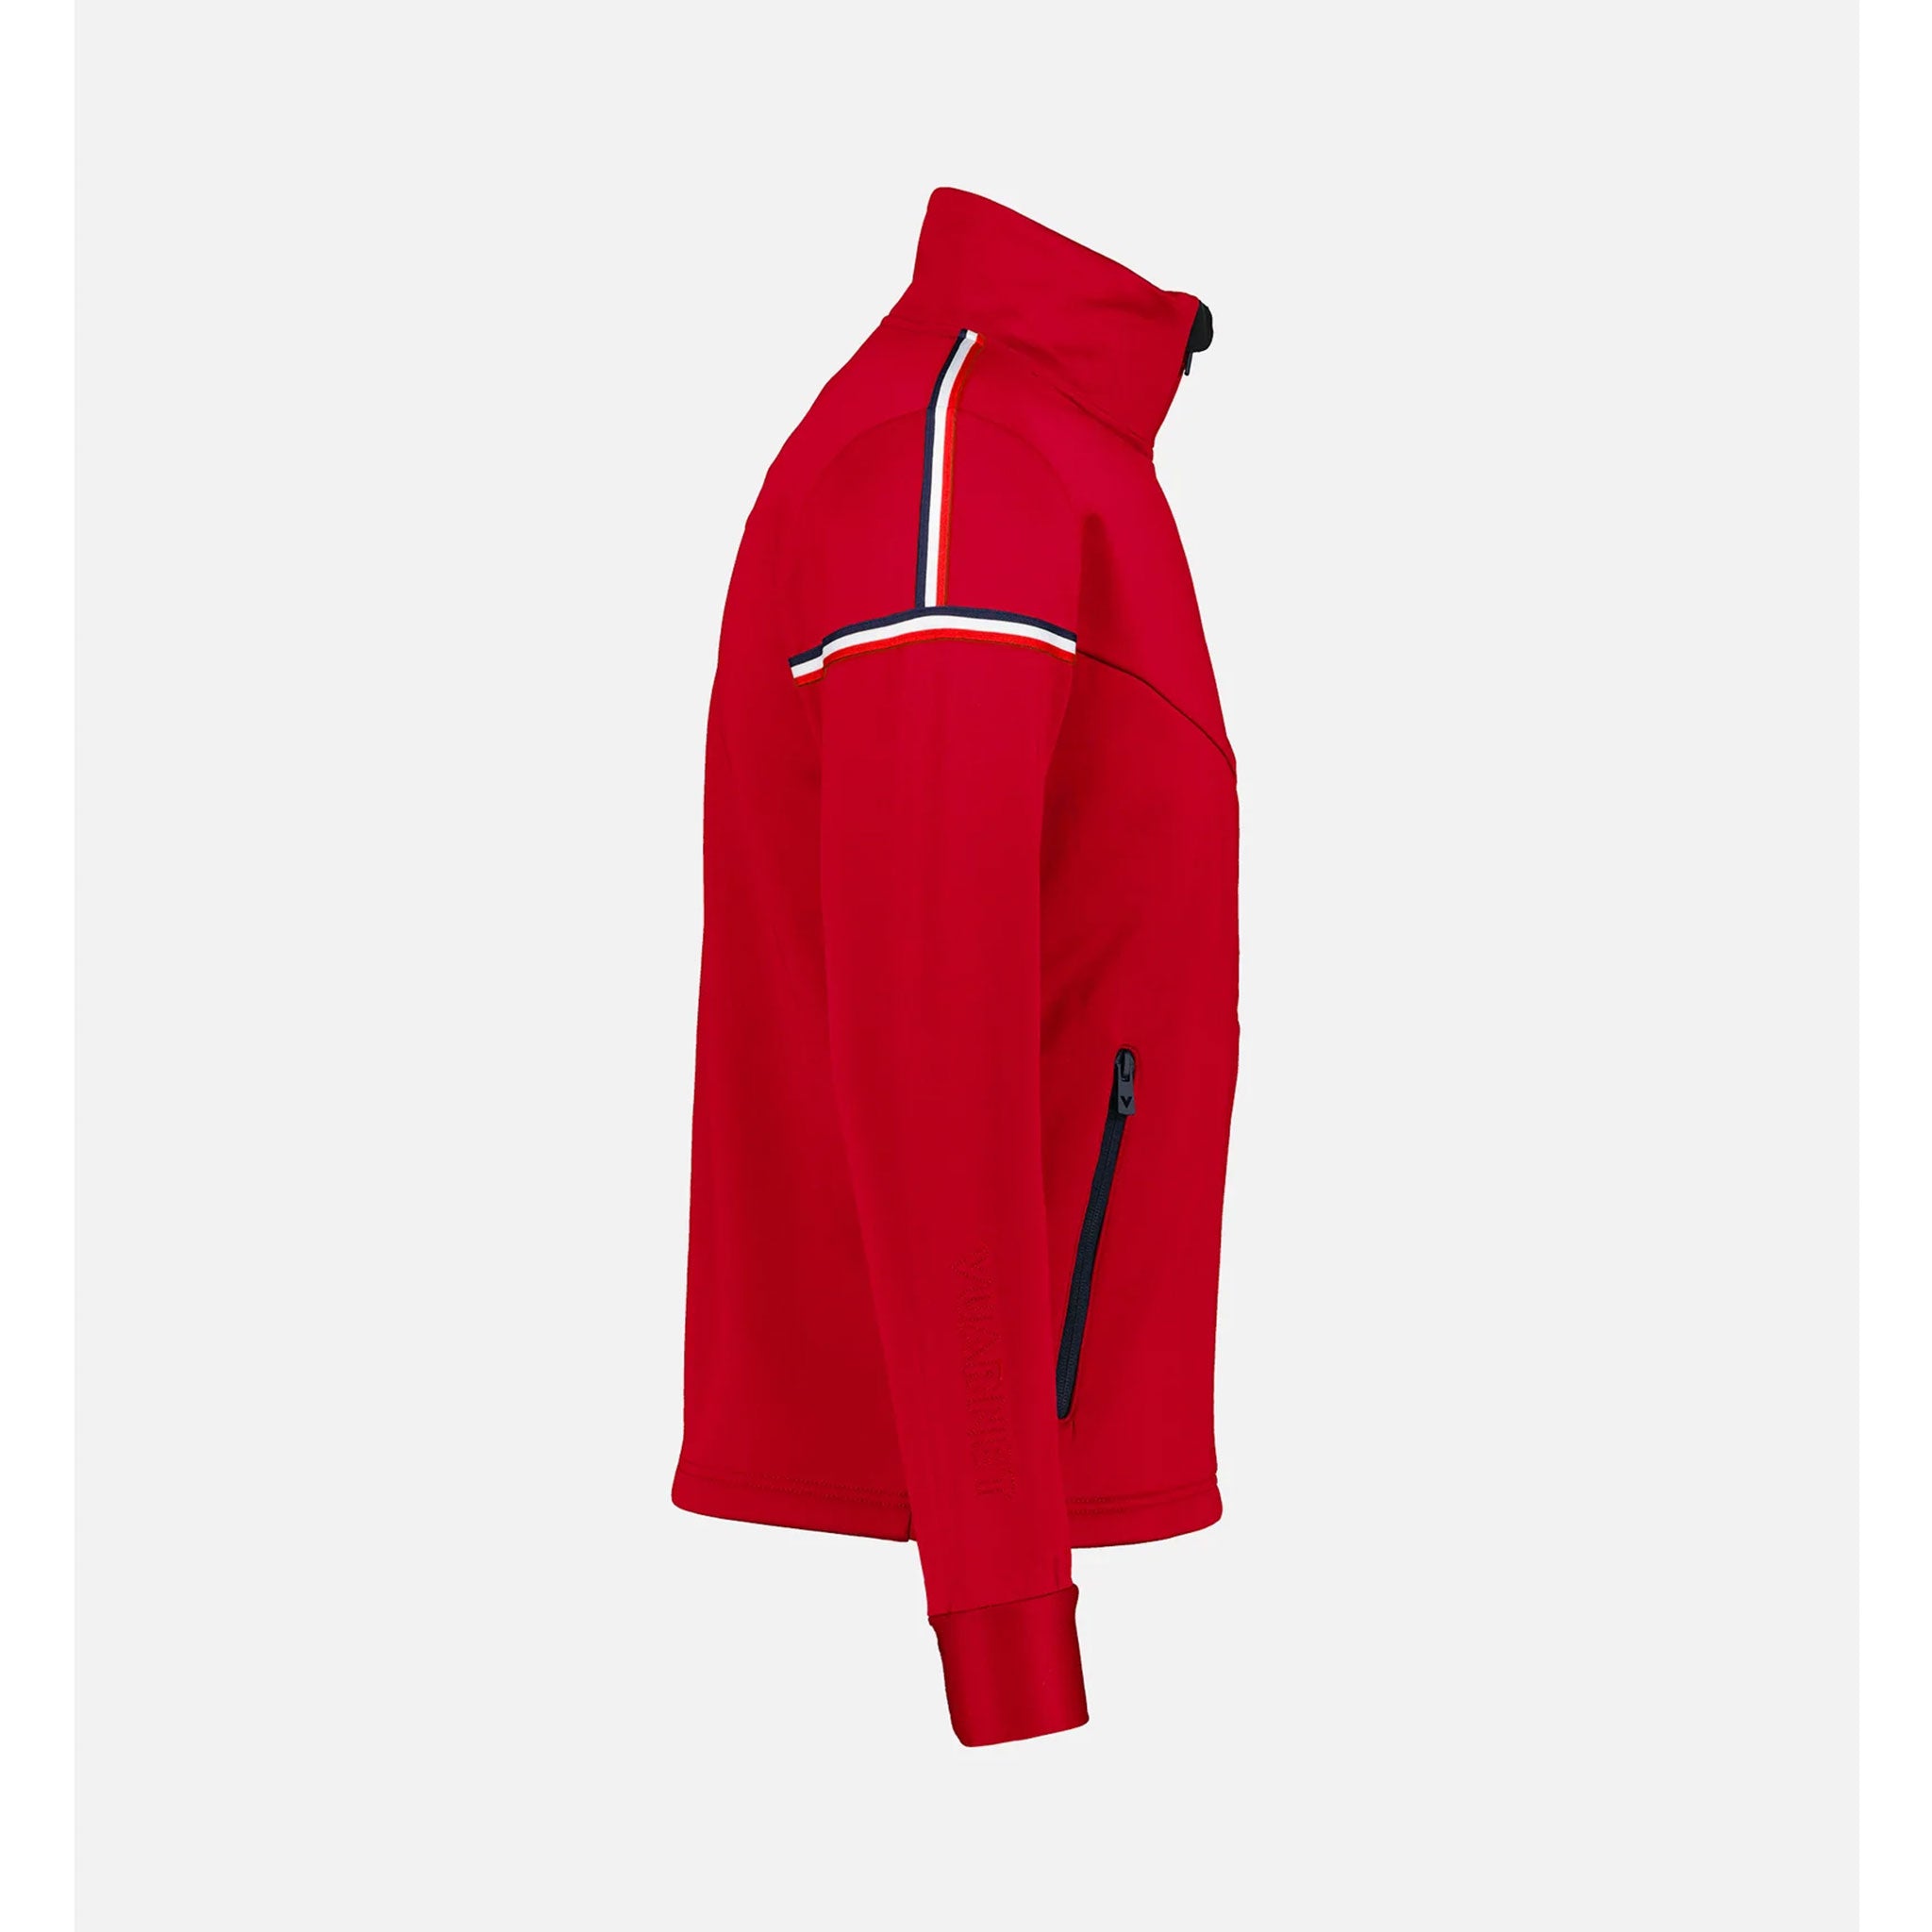 Sevice Fleece in Red